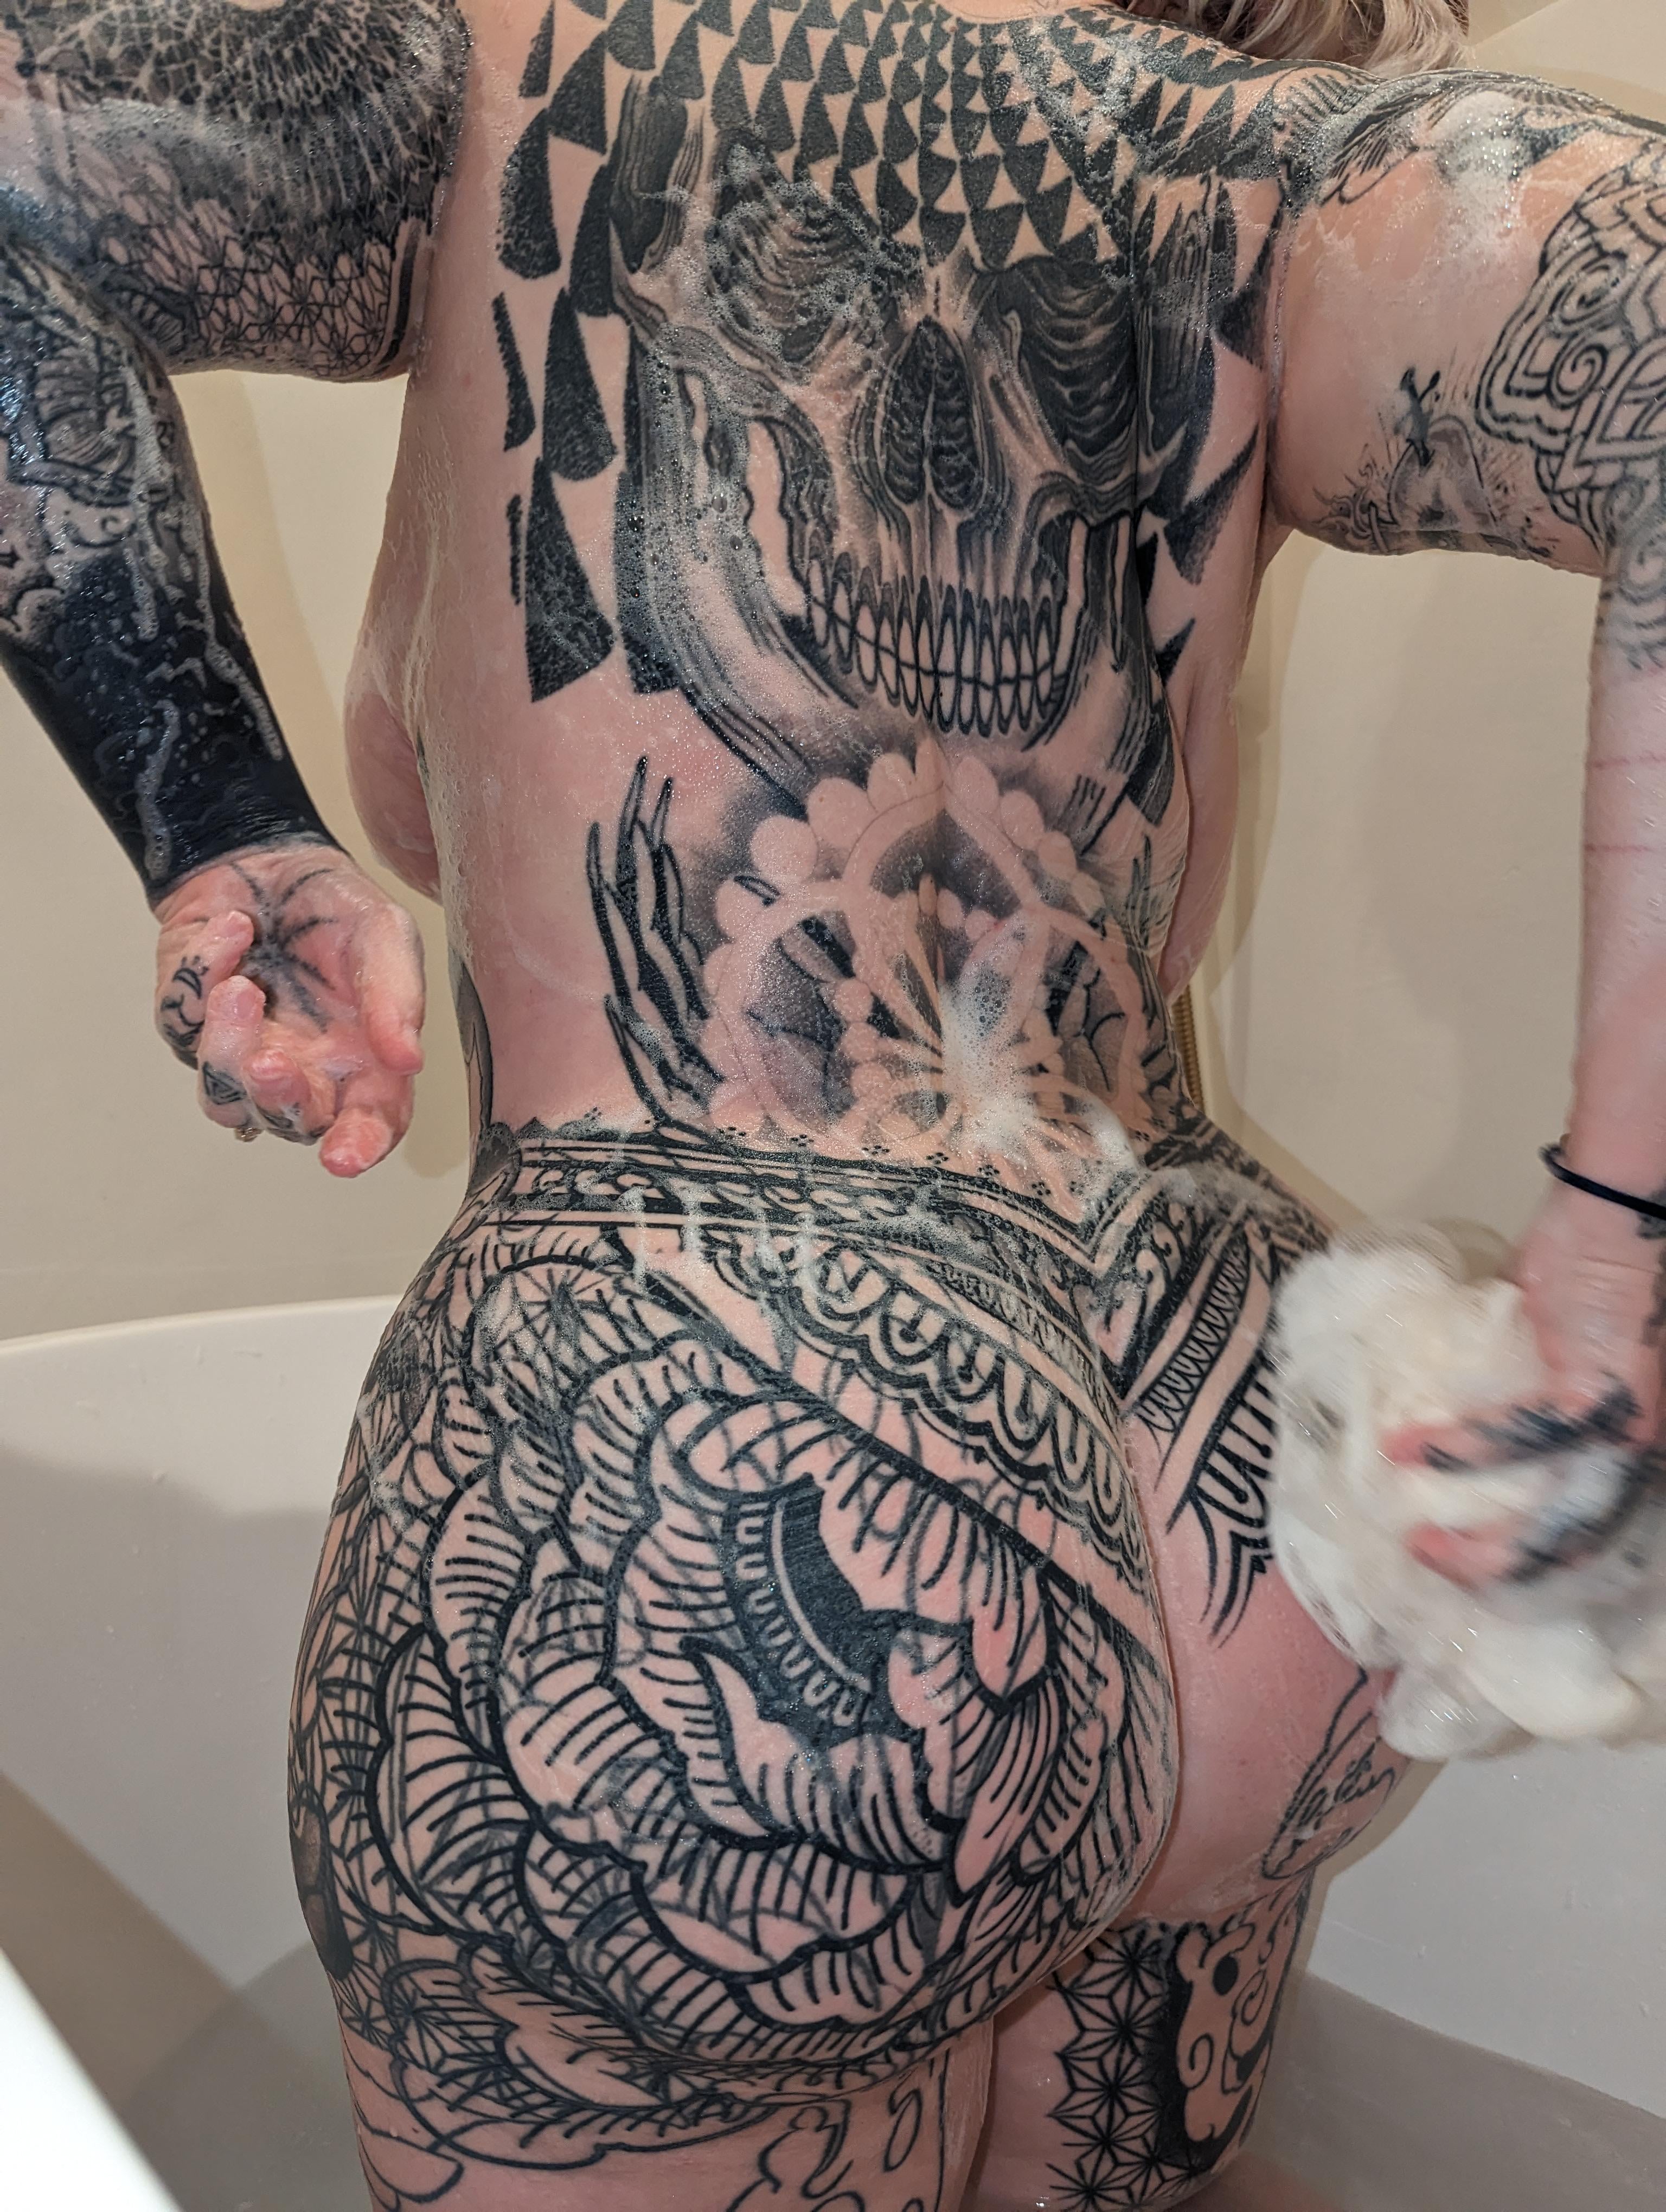 PAWG Cleaning the tats